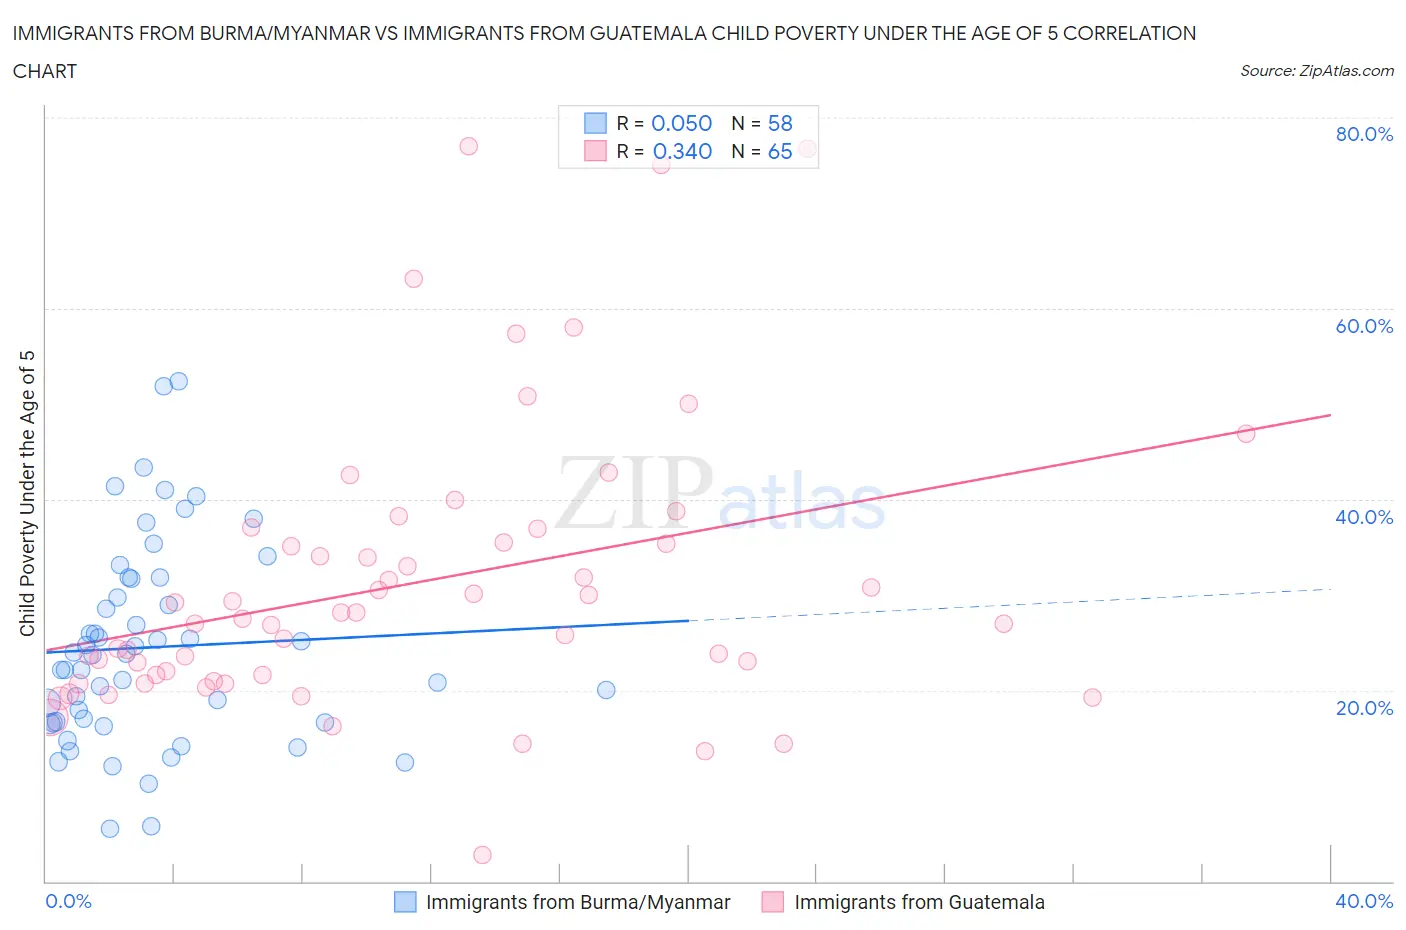 Immigrants from Burma/Myanmar vs Immigrants from Guatemala Child Poverty Under the Age of 5